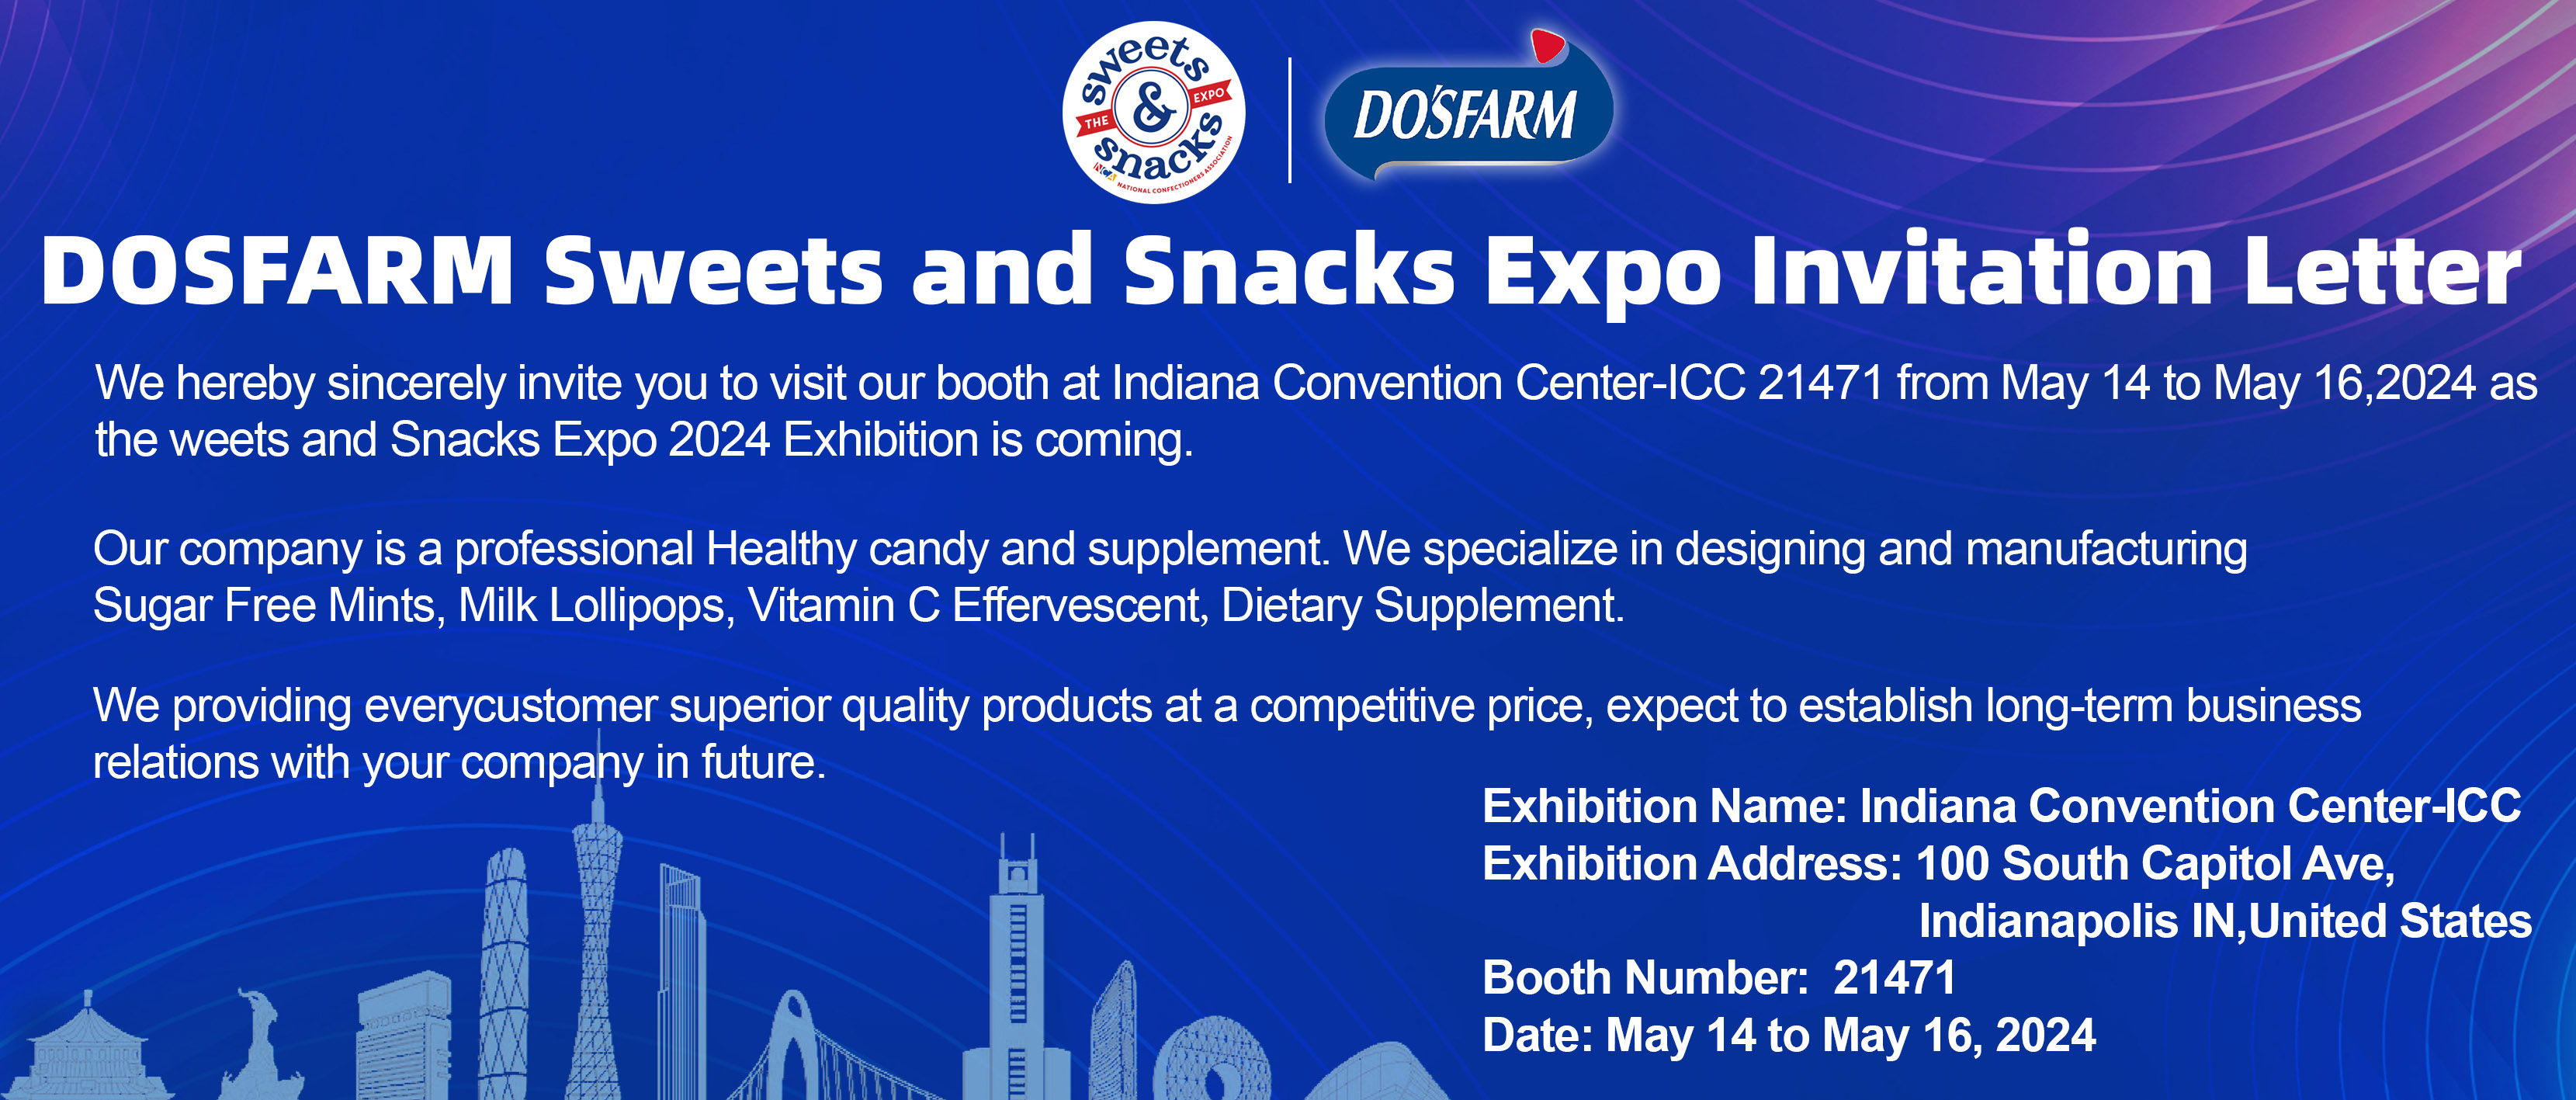 DOSFARM Sweets and Snacks Expo 2024 Exhibition Invitation Letter